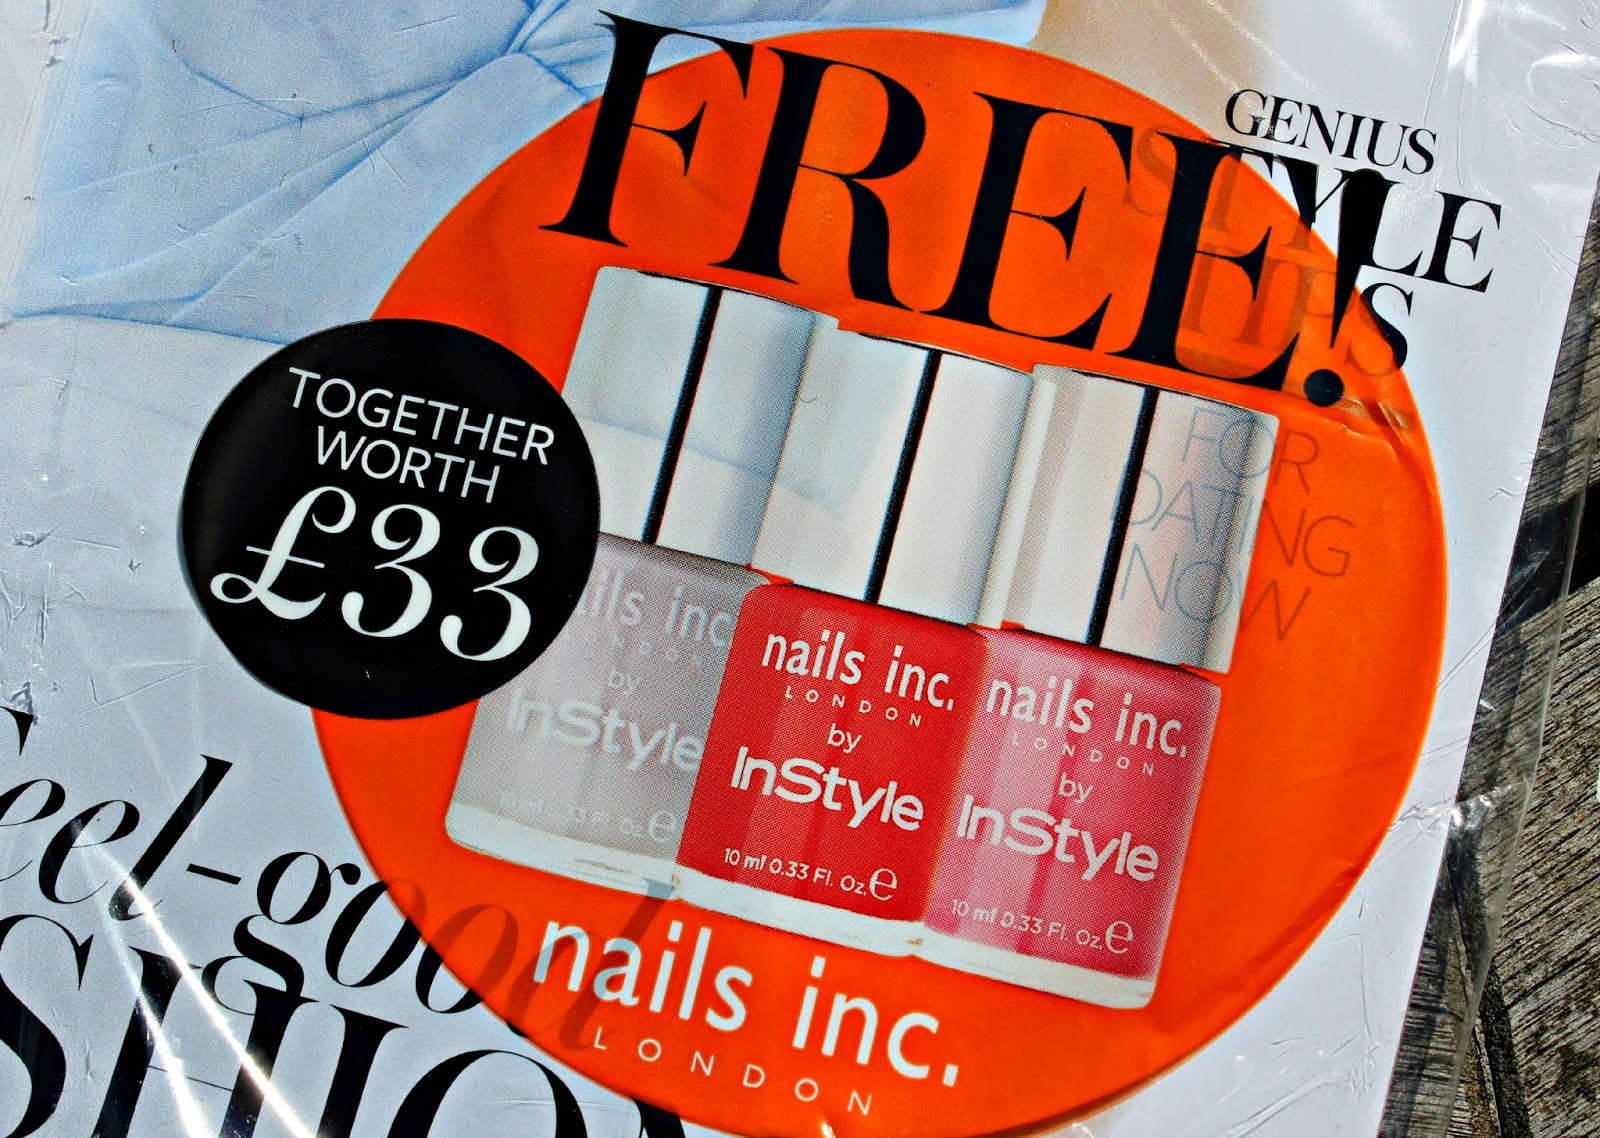 A picture of Nails Inc with June Instyle